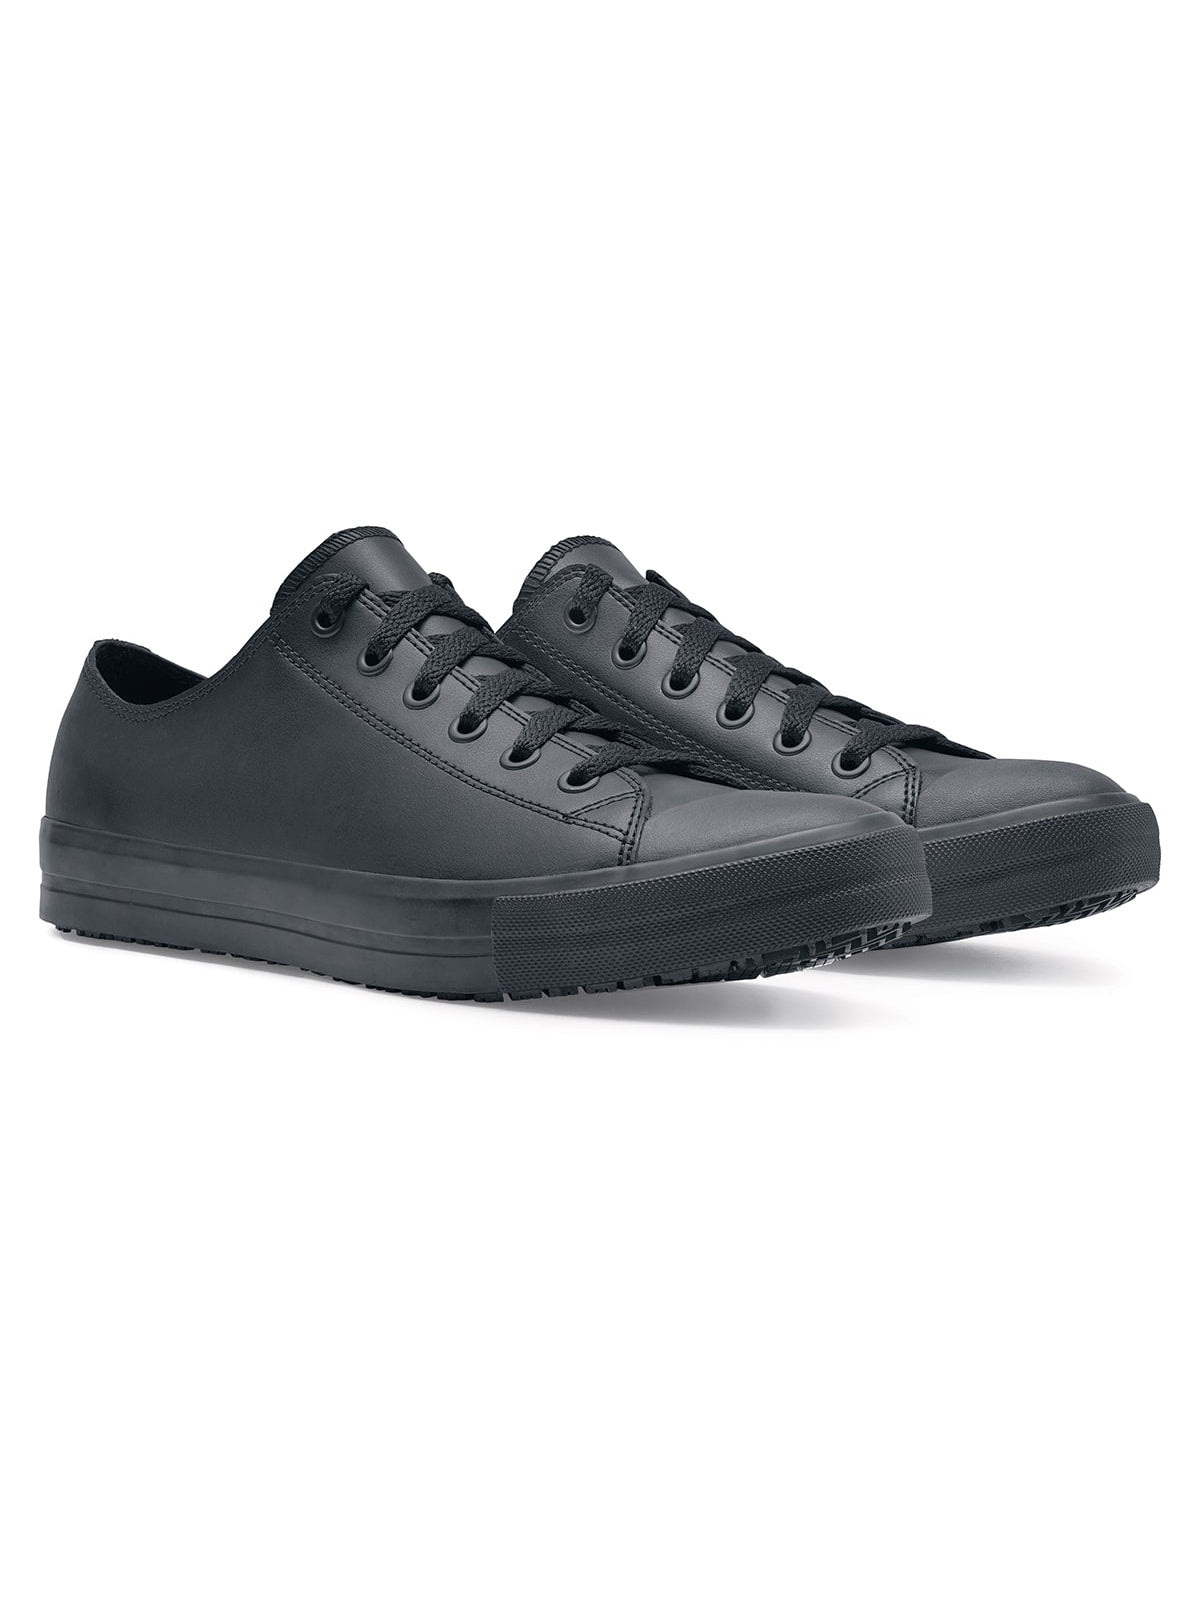 Unisex Work Shoe Delray by  Shoes For Crews.